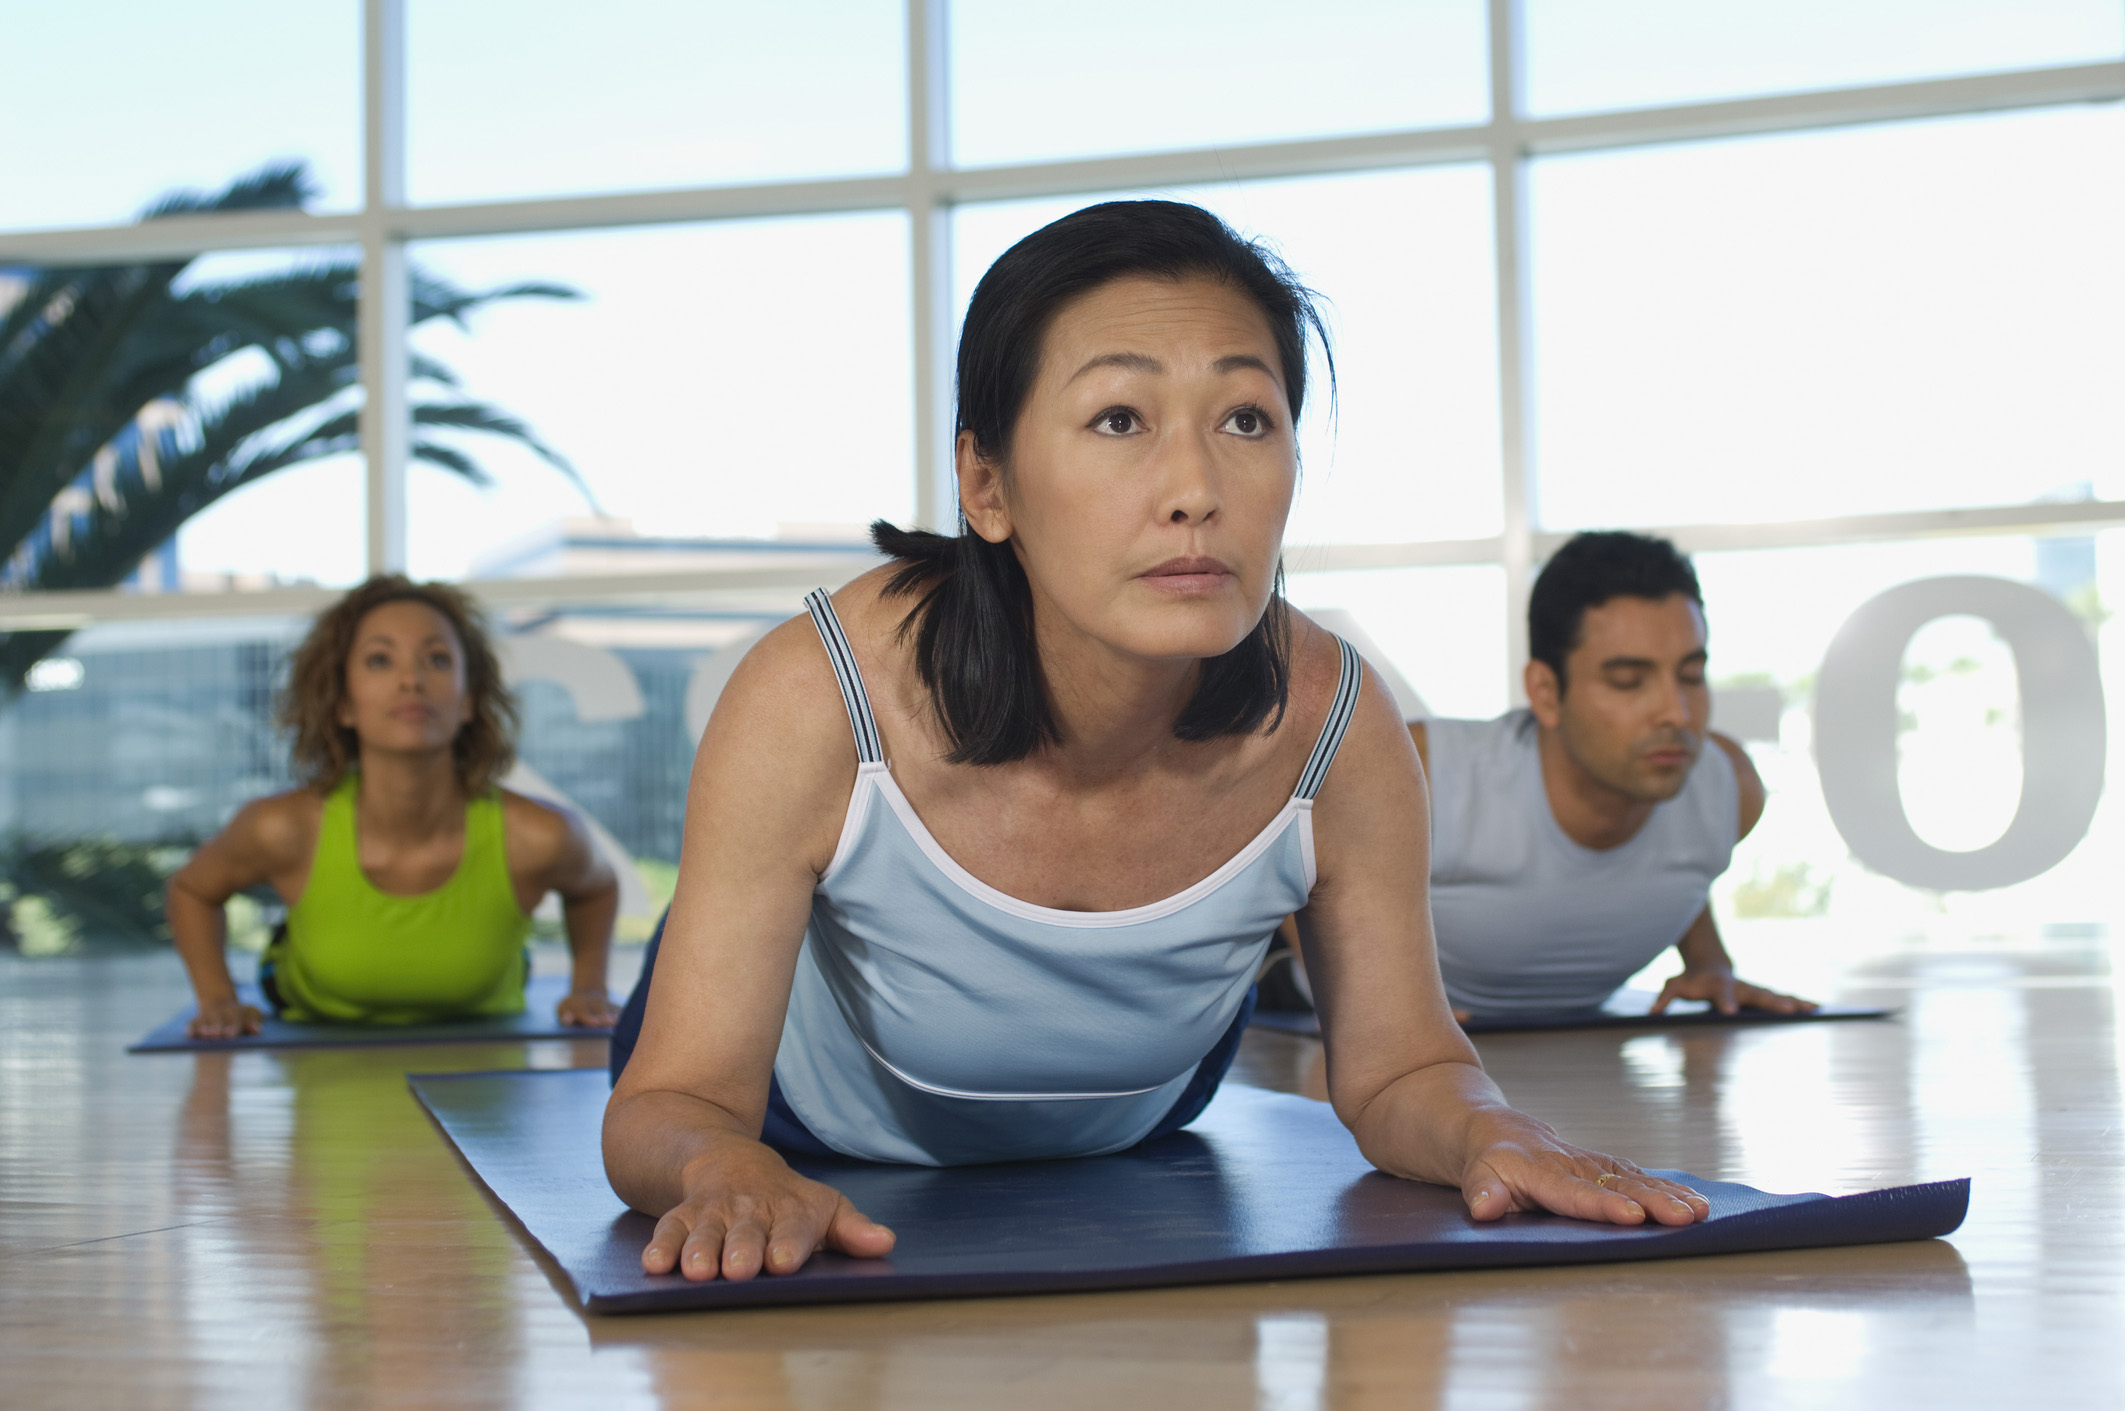 Yoga eases moderate to severe chronic low back pain